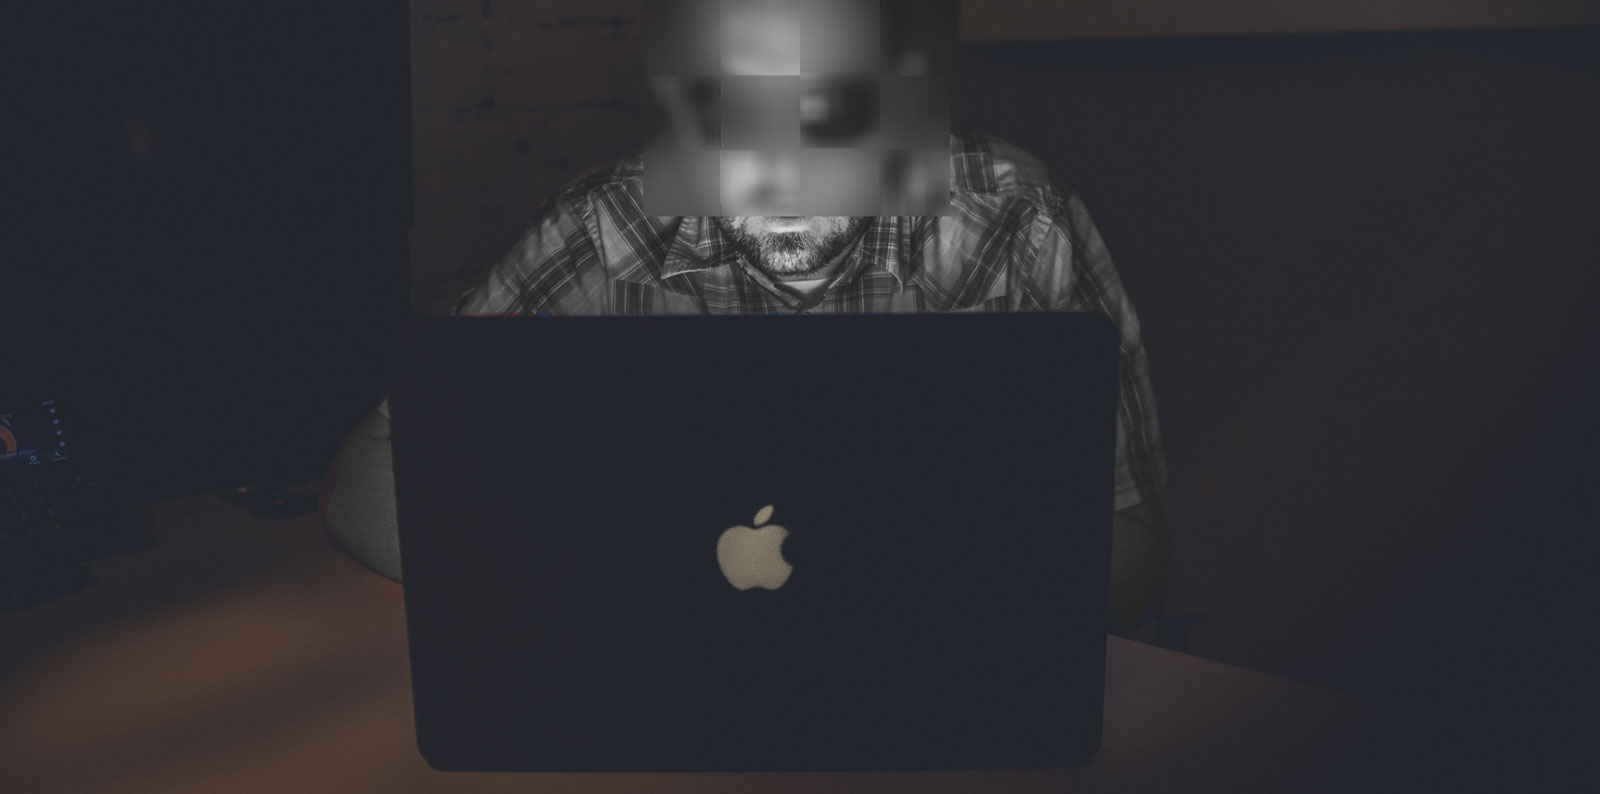 Technical Penguins Case Study: Cleaning Up After WordPress Hack. A man whose color has been changed to grayscale sits behind an open laptop, his face pixelated into a blur.